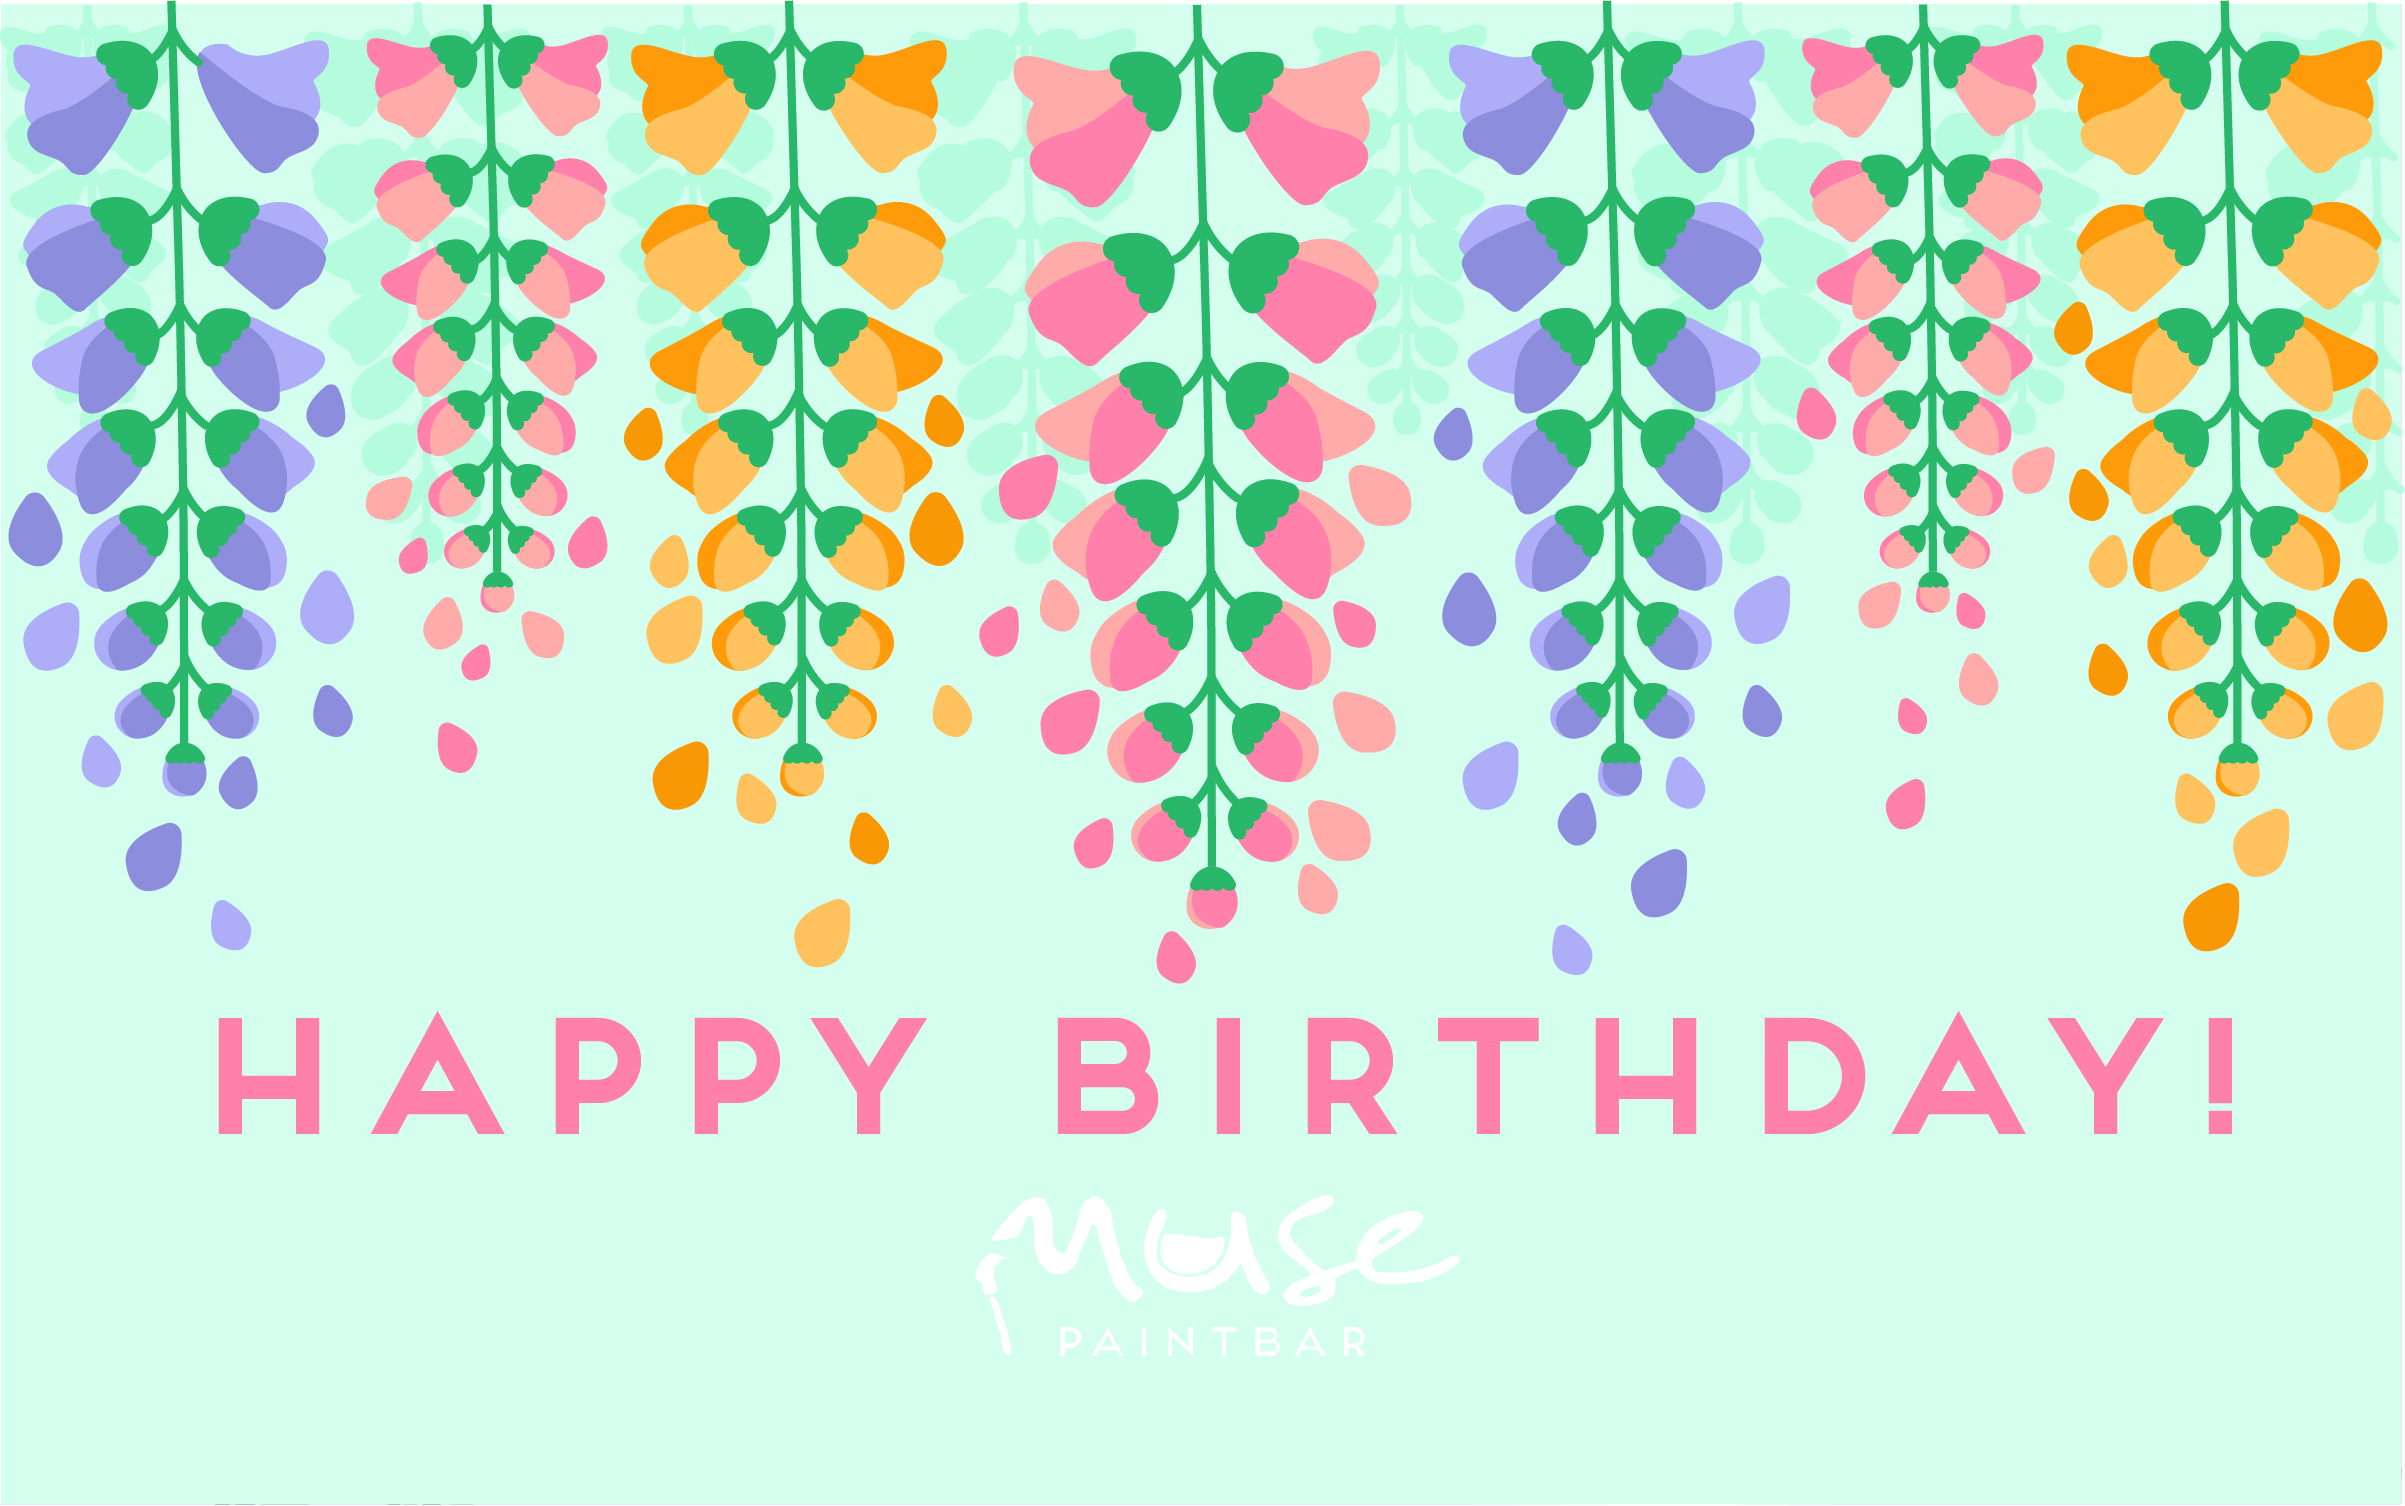 Spring Birthday- Muse Paintbar Gift Card